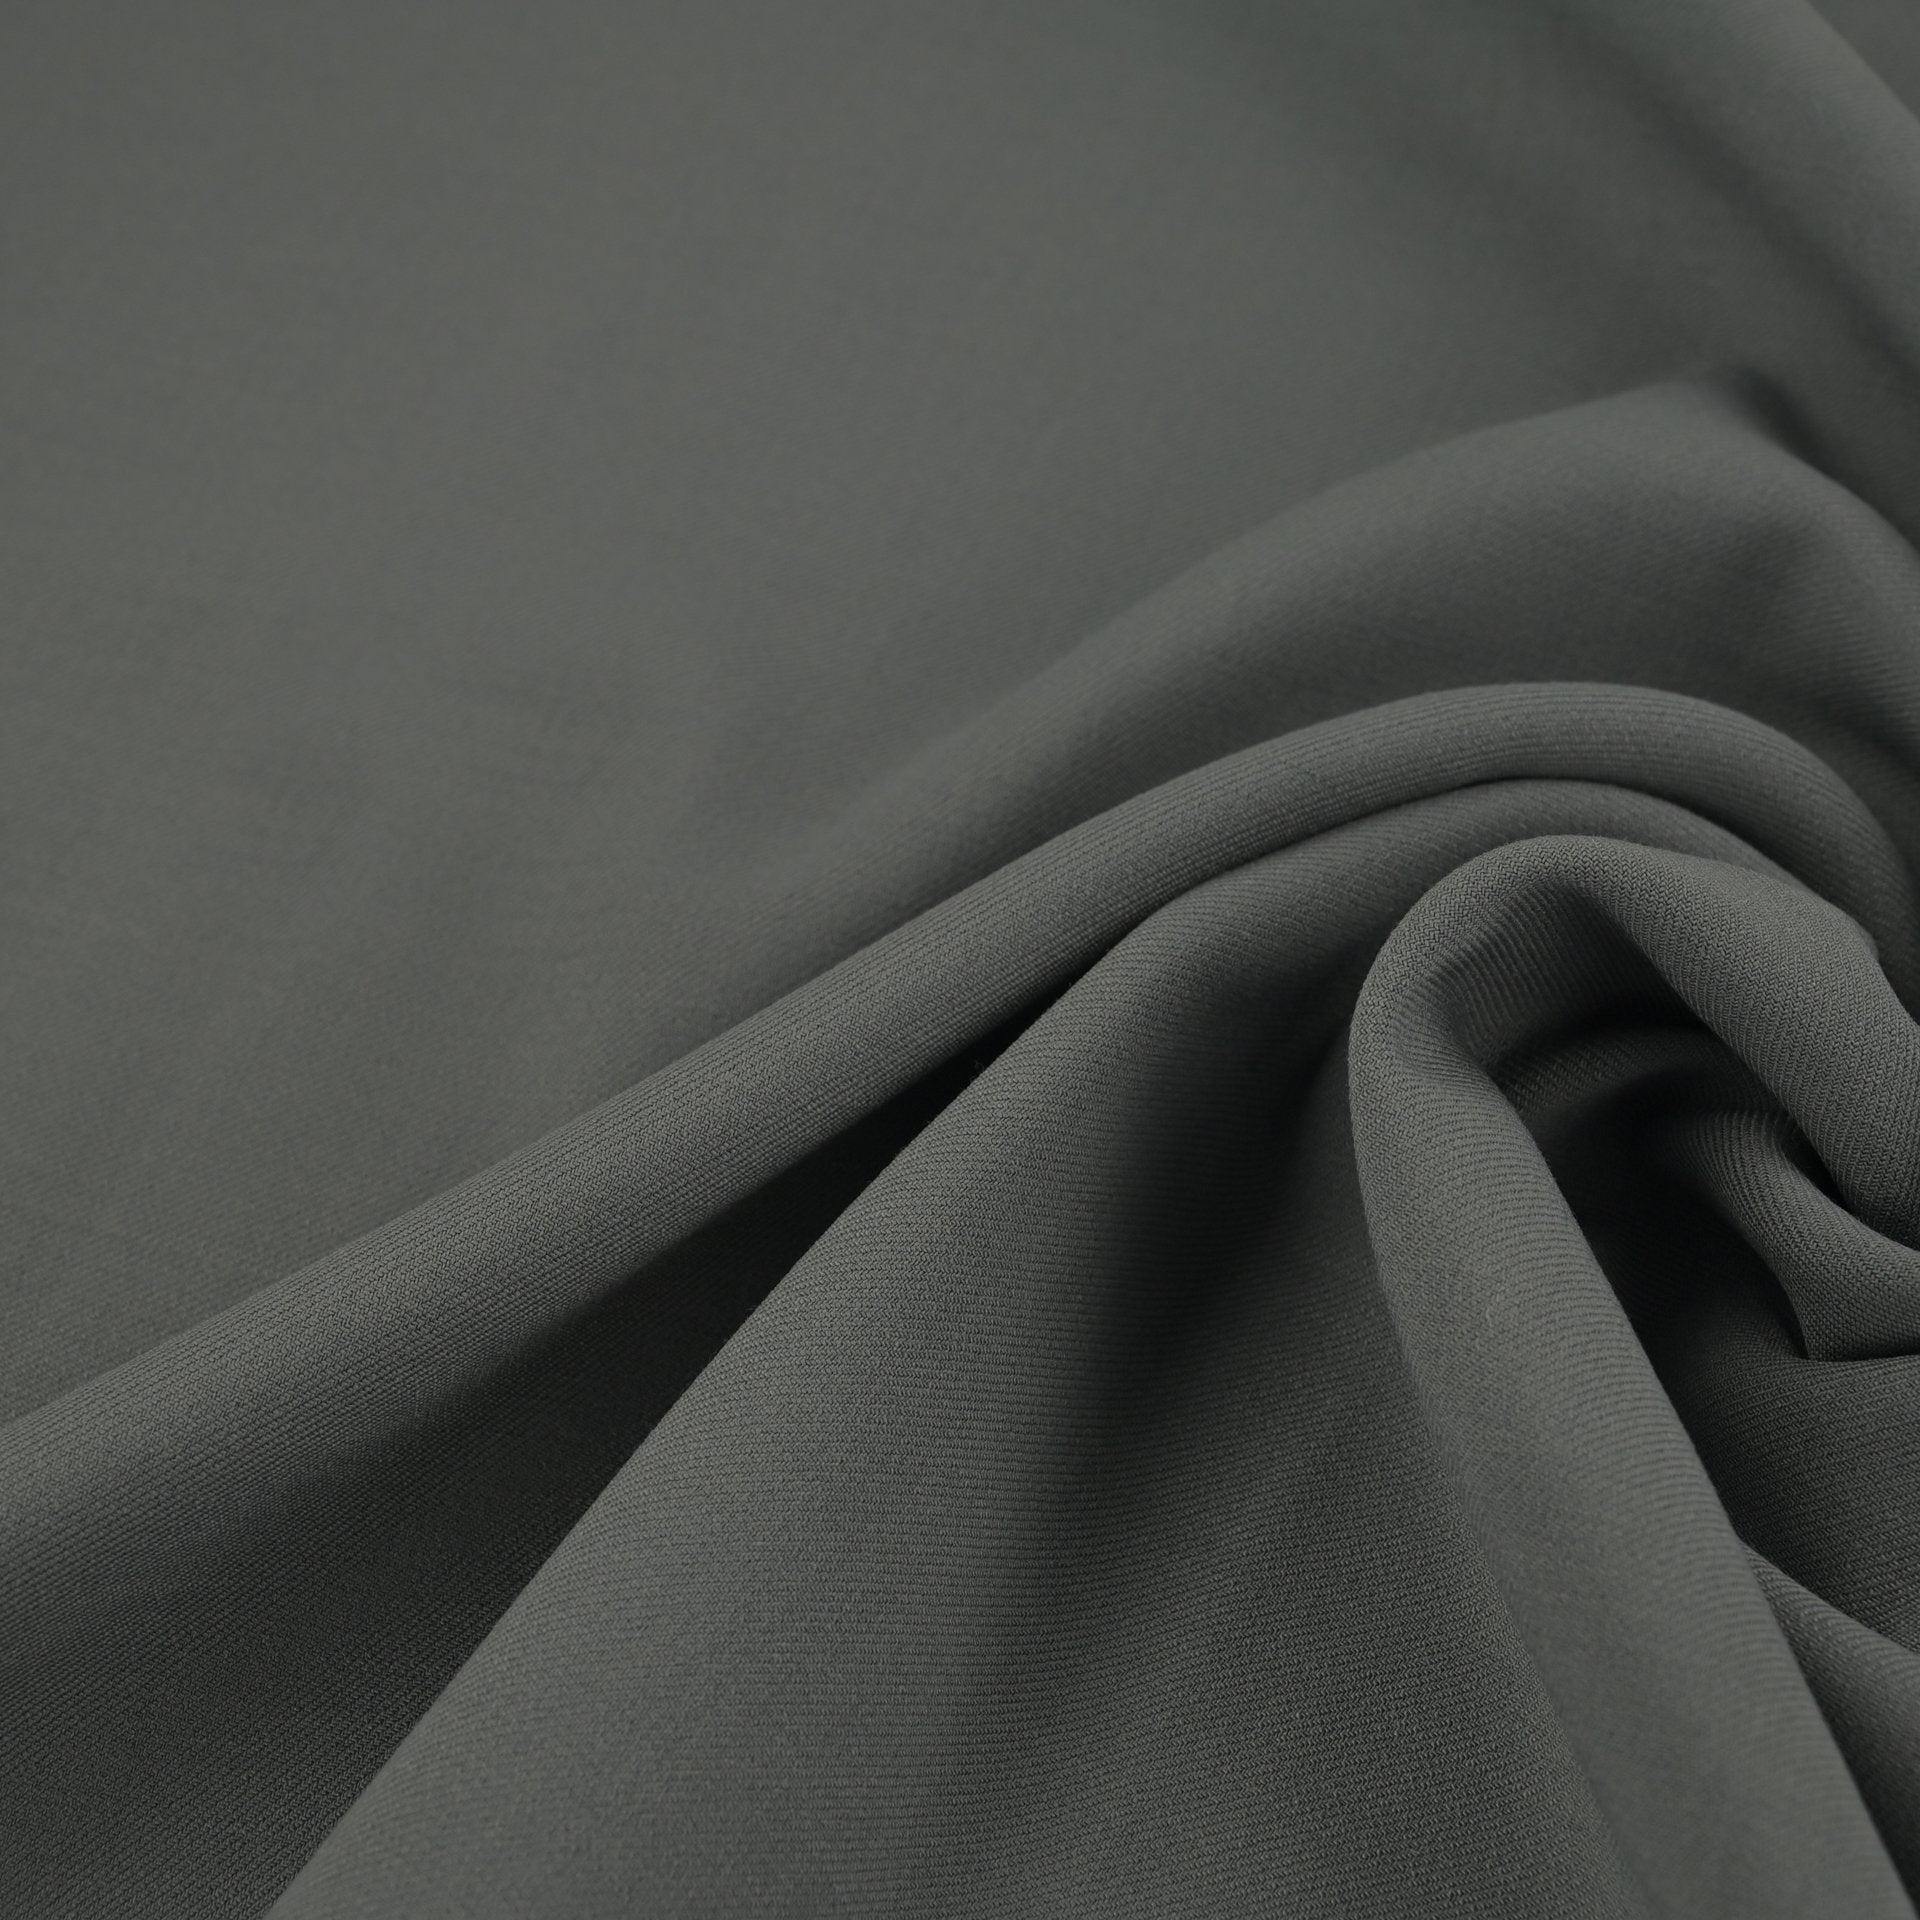 Grey Doublewave Suiting Fabric 96548